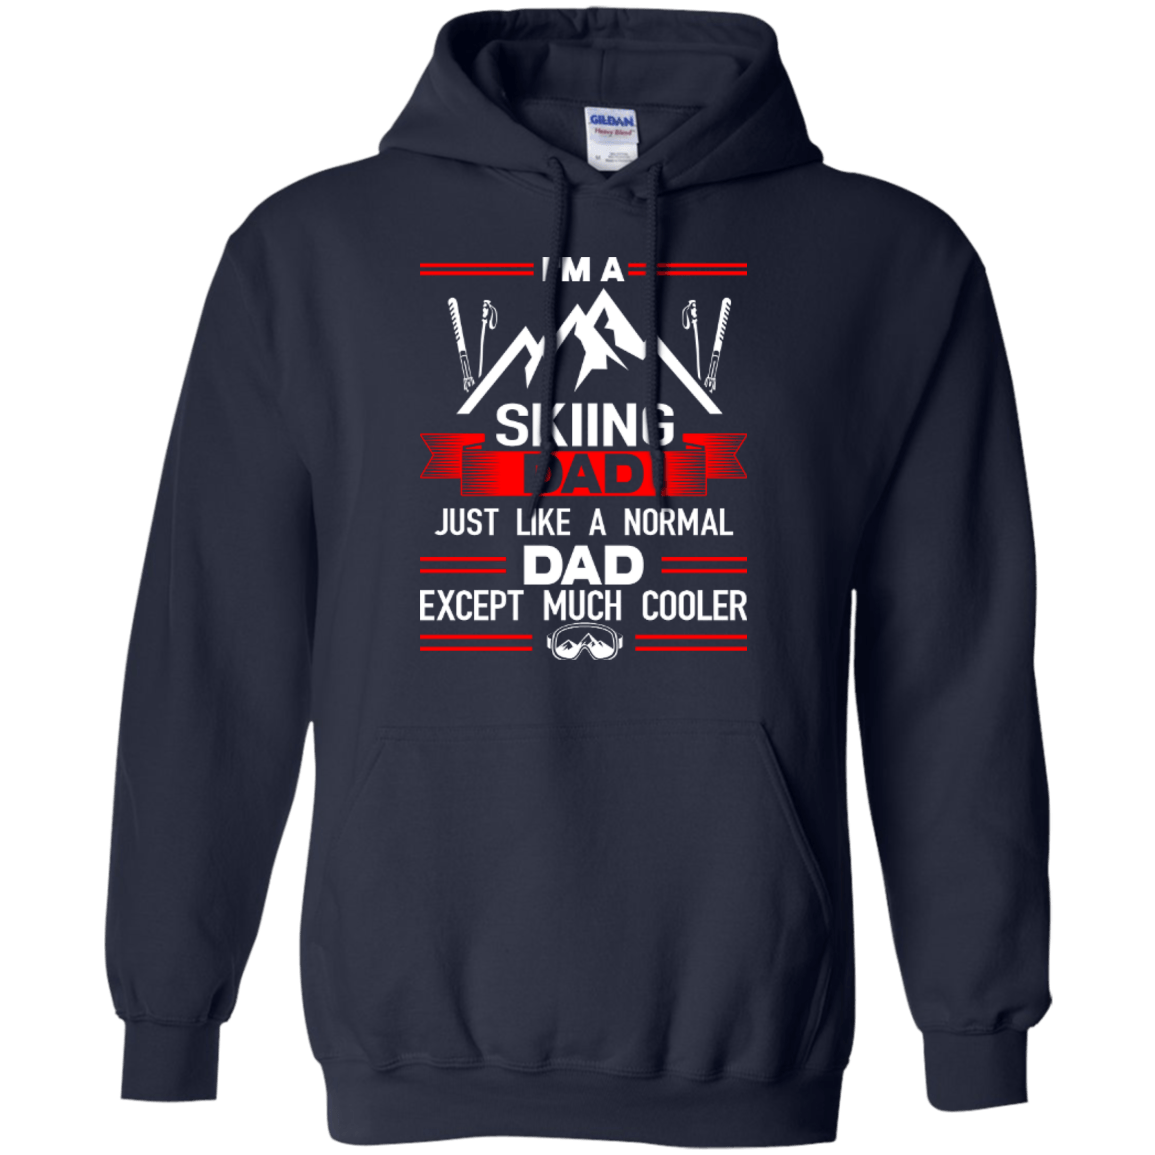 I'm A Skiing Dad Just Like A Normal Dad Except Much Cooler Hoodies - Powderaddicts